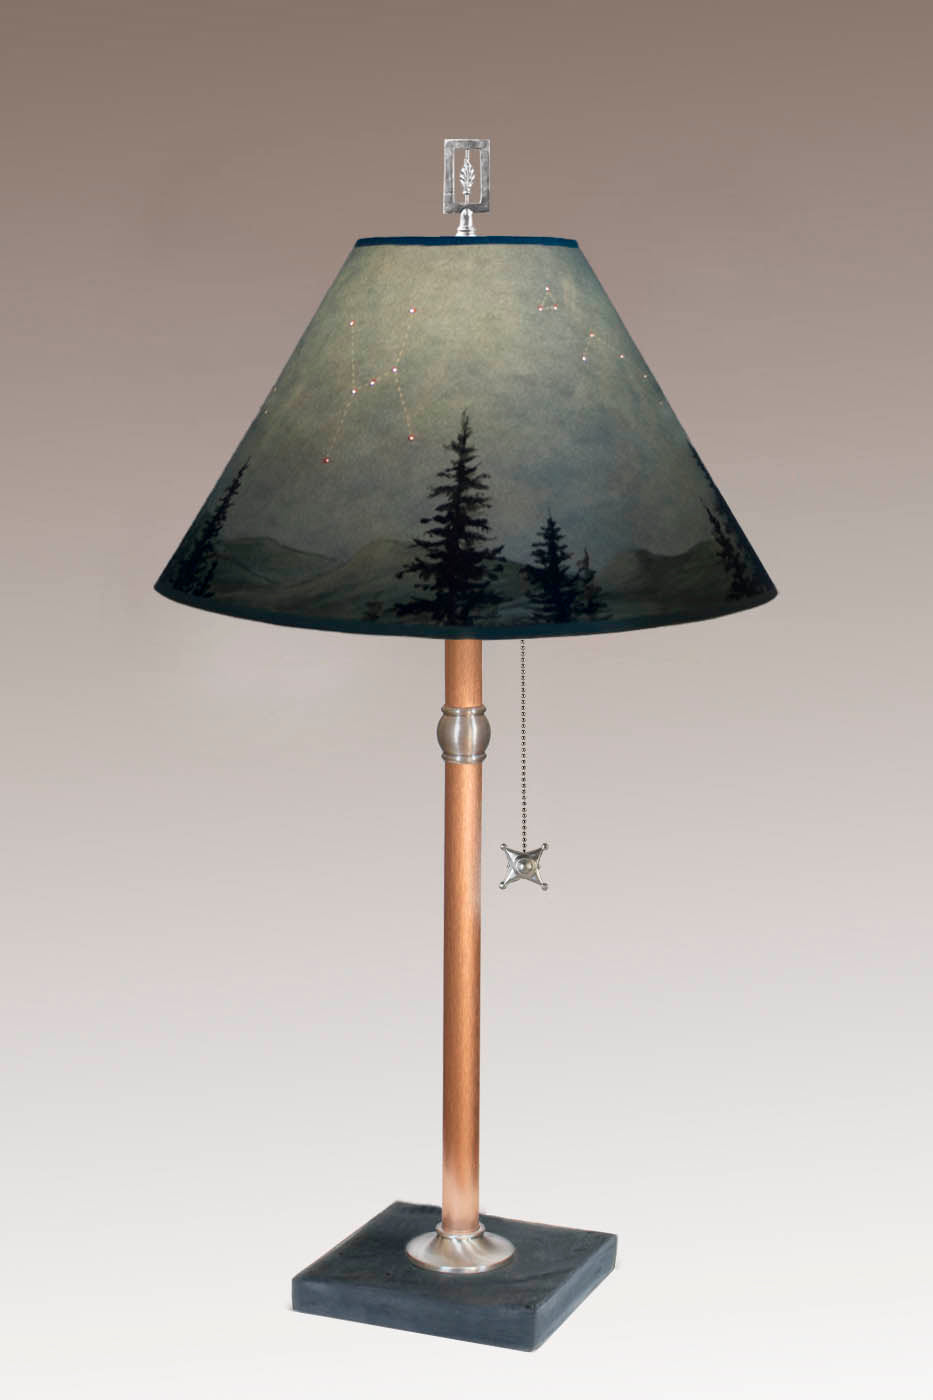 Janna Ugone & Co Table Lamps Copper Table Lamp with Medium Conical Shade in Midnight Sky